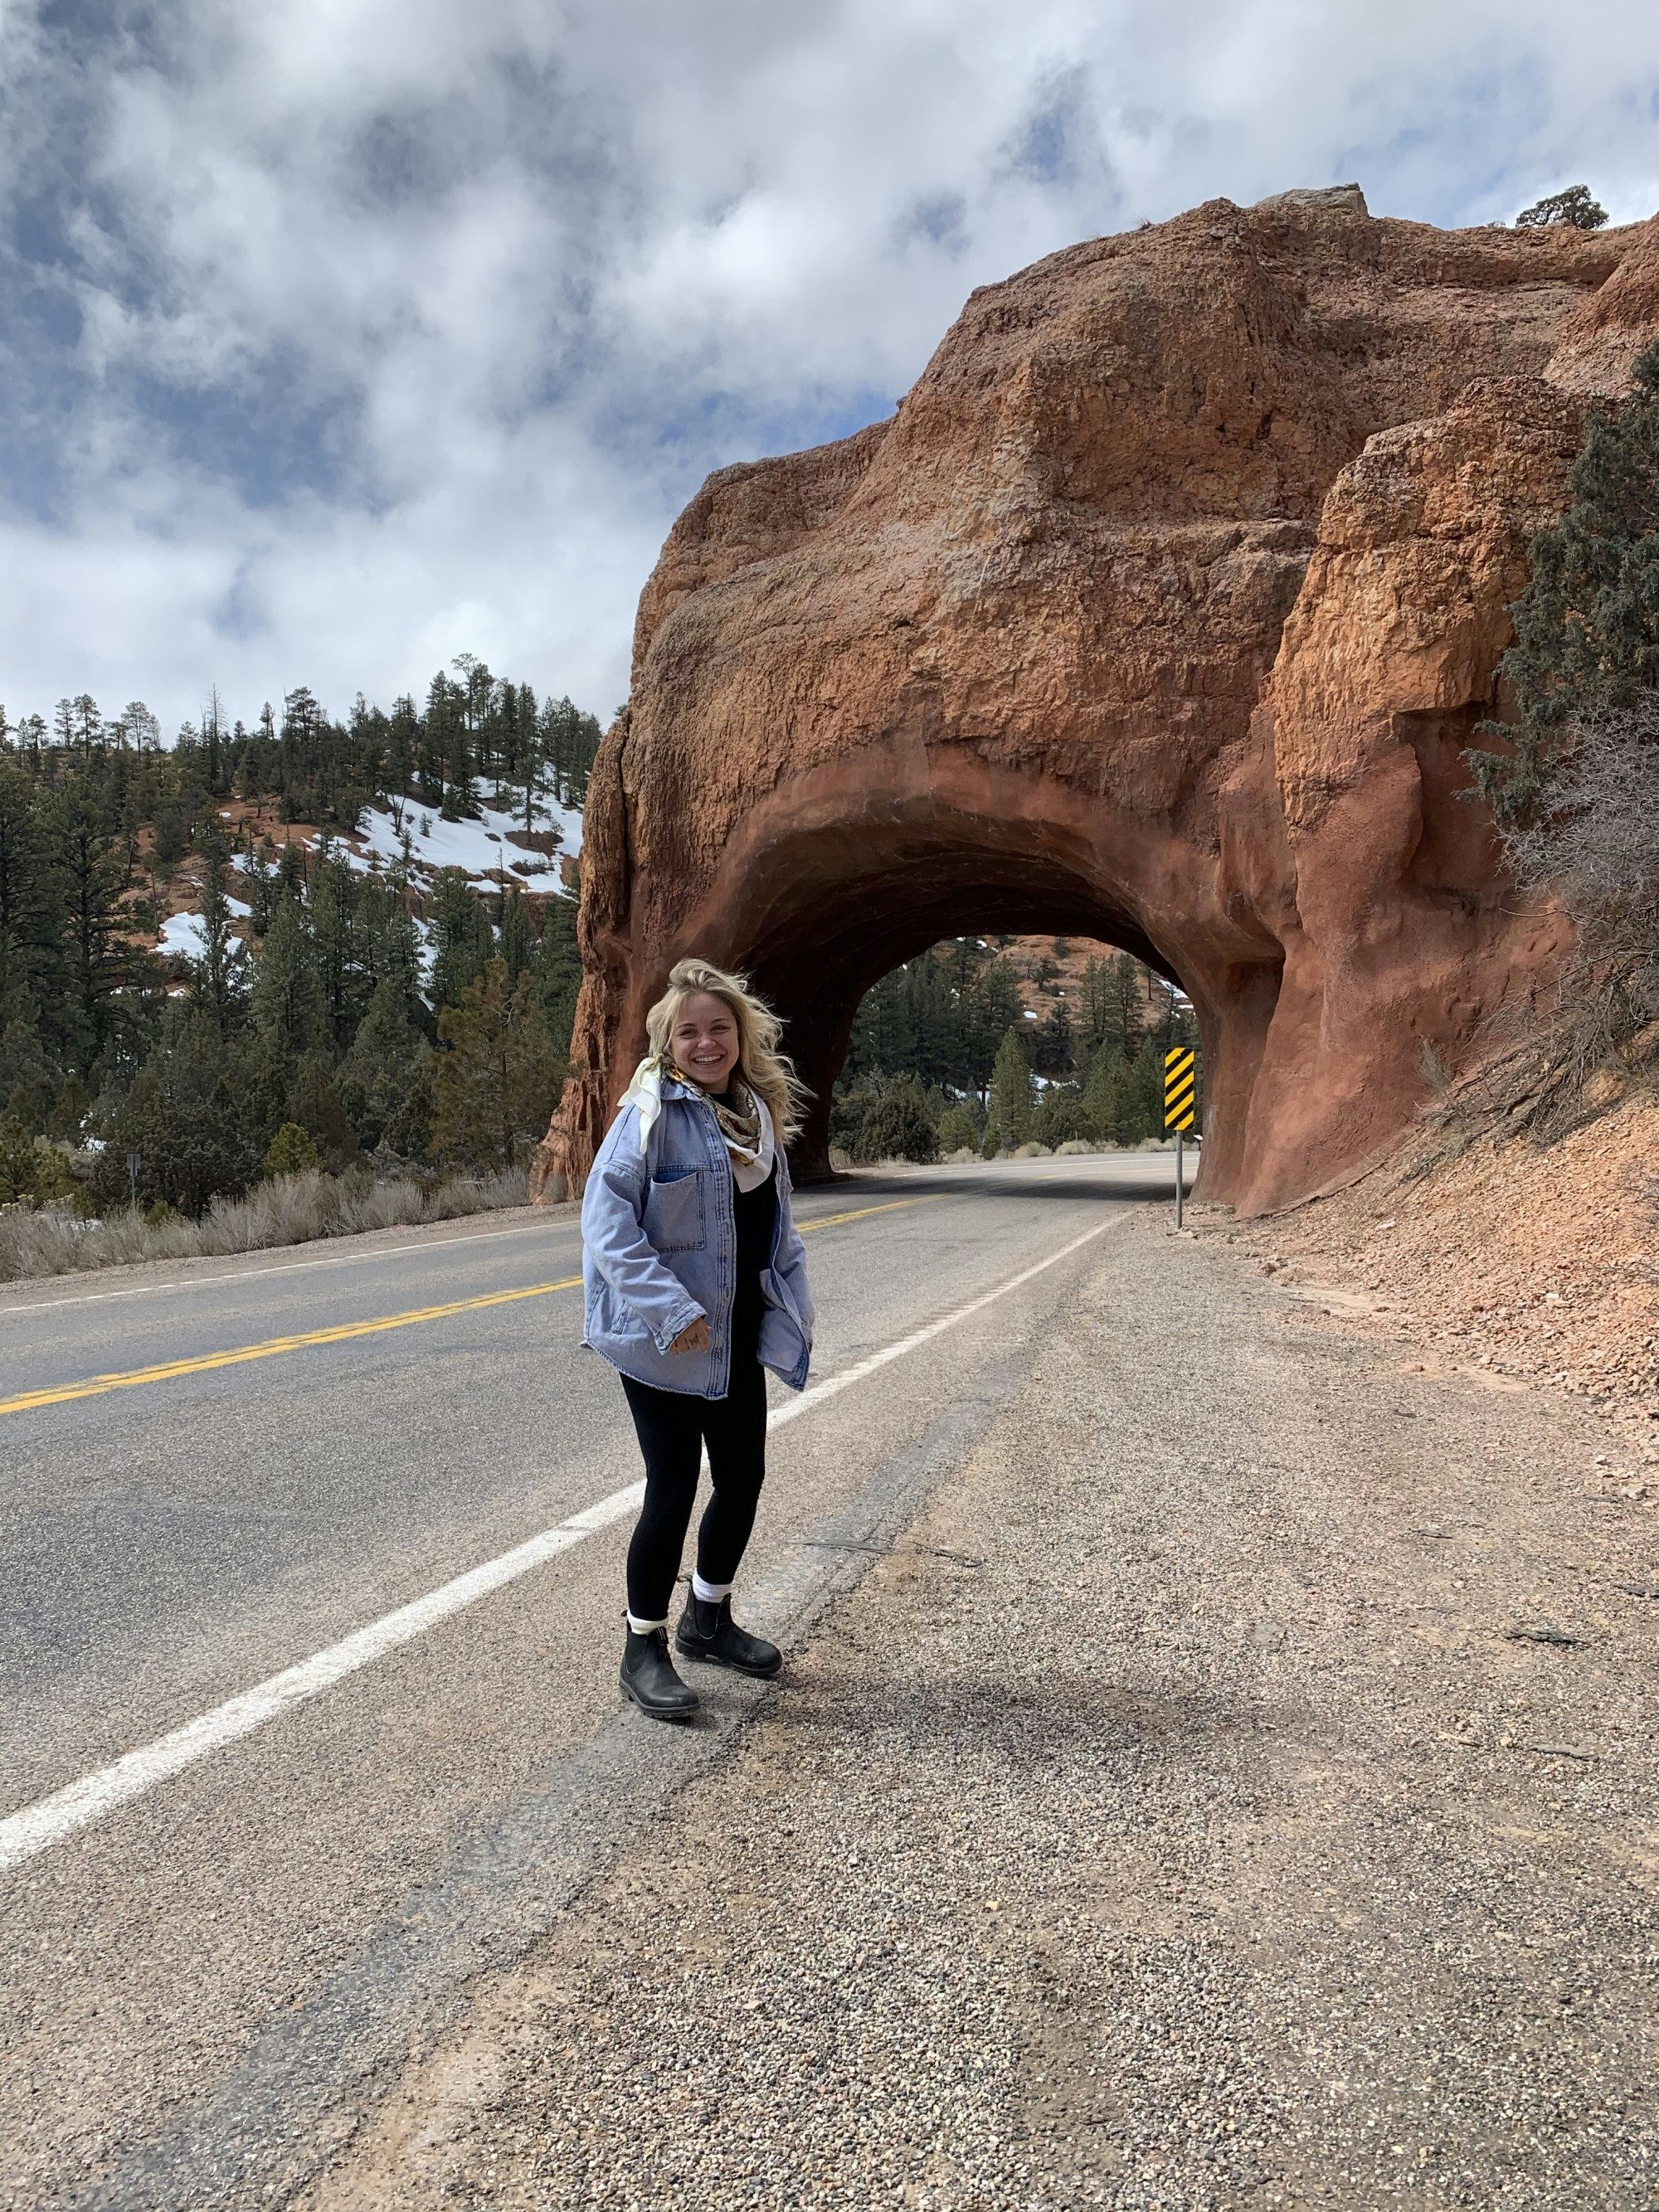 Travel Advisor Jessica Fappiano stands on a road in front of a natural stone arch wearing a jean jacket and hiking boots